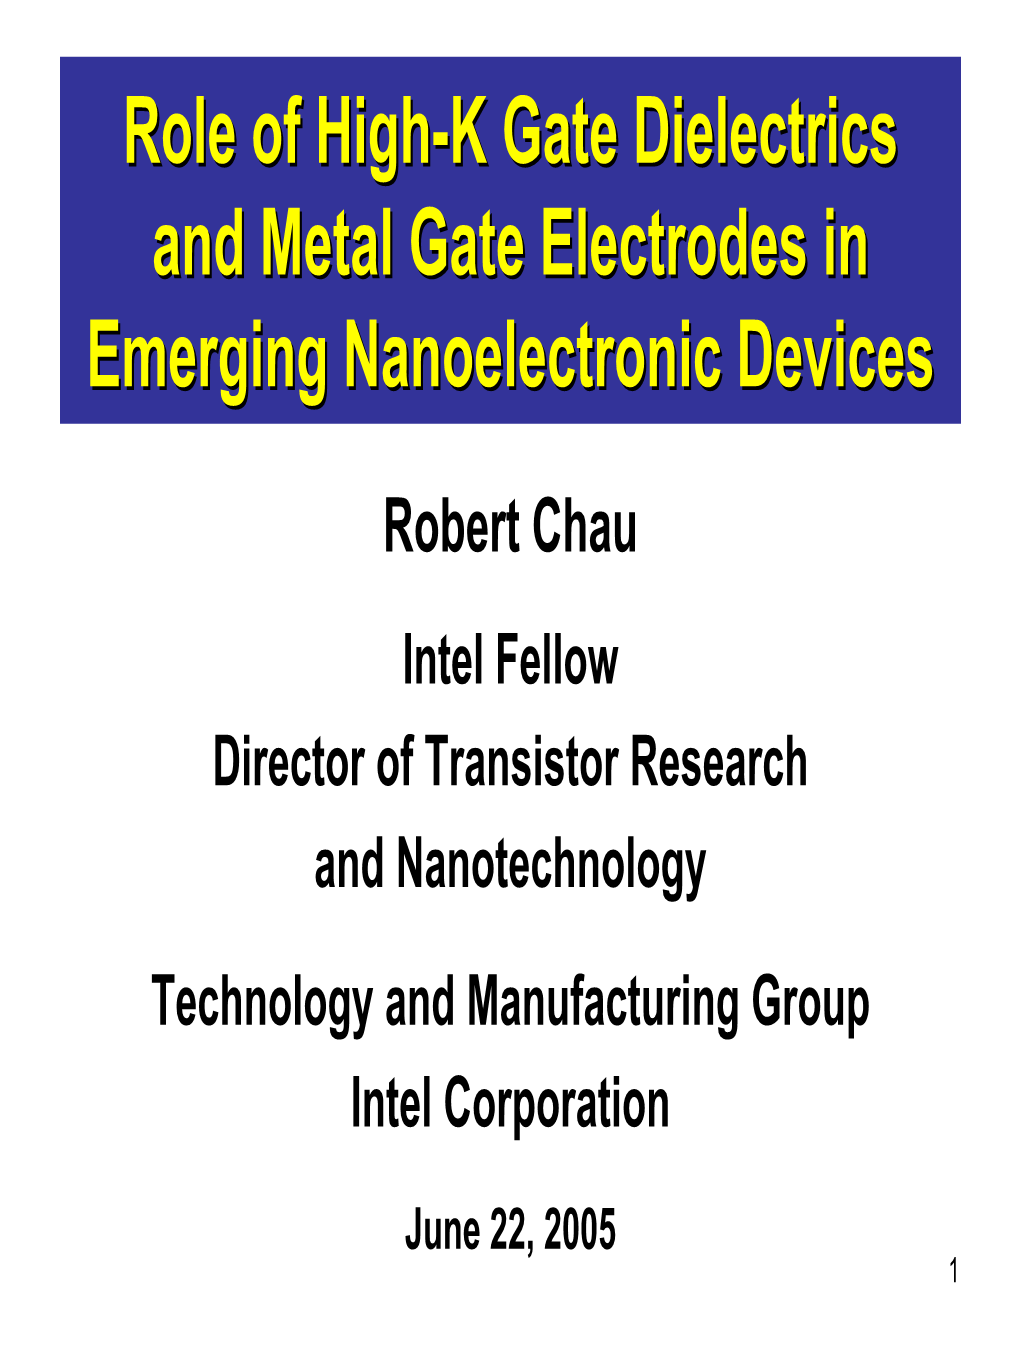 Role of High-K Gate Dielectrics and Metal Gate Electrodes in Emerging Nanoelectronic Devices